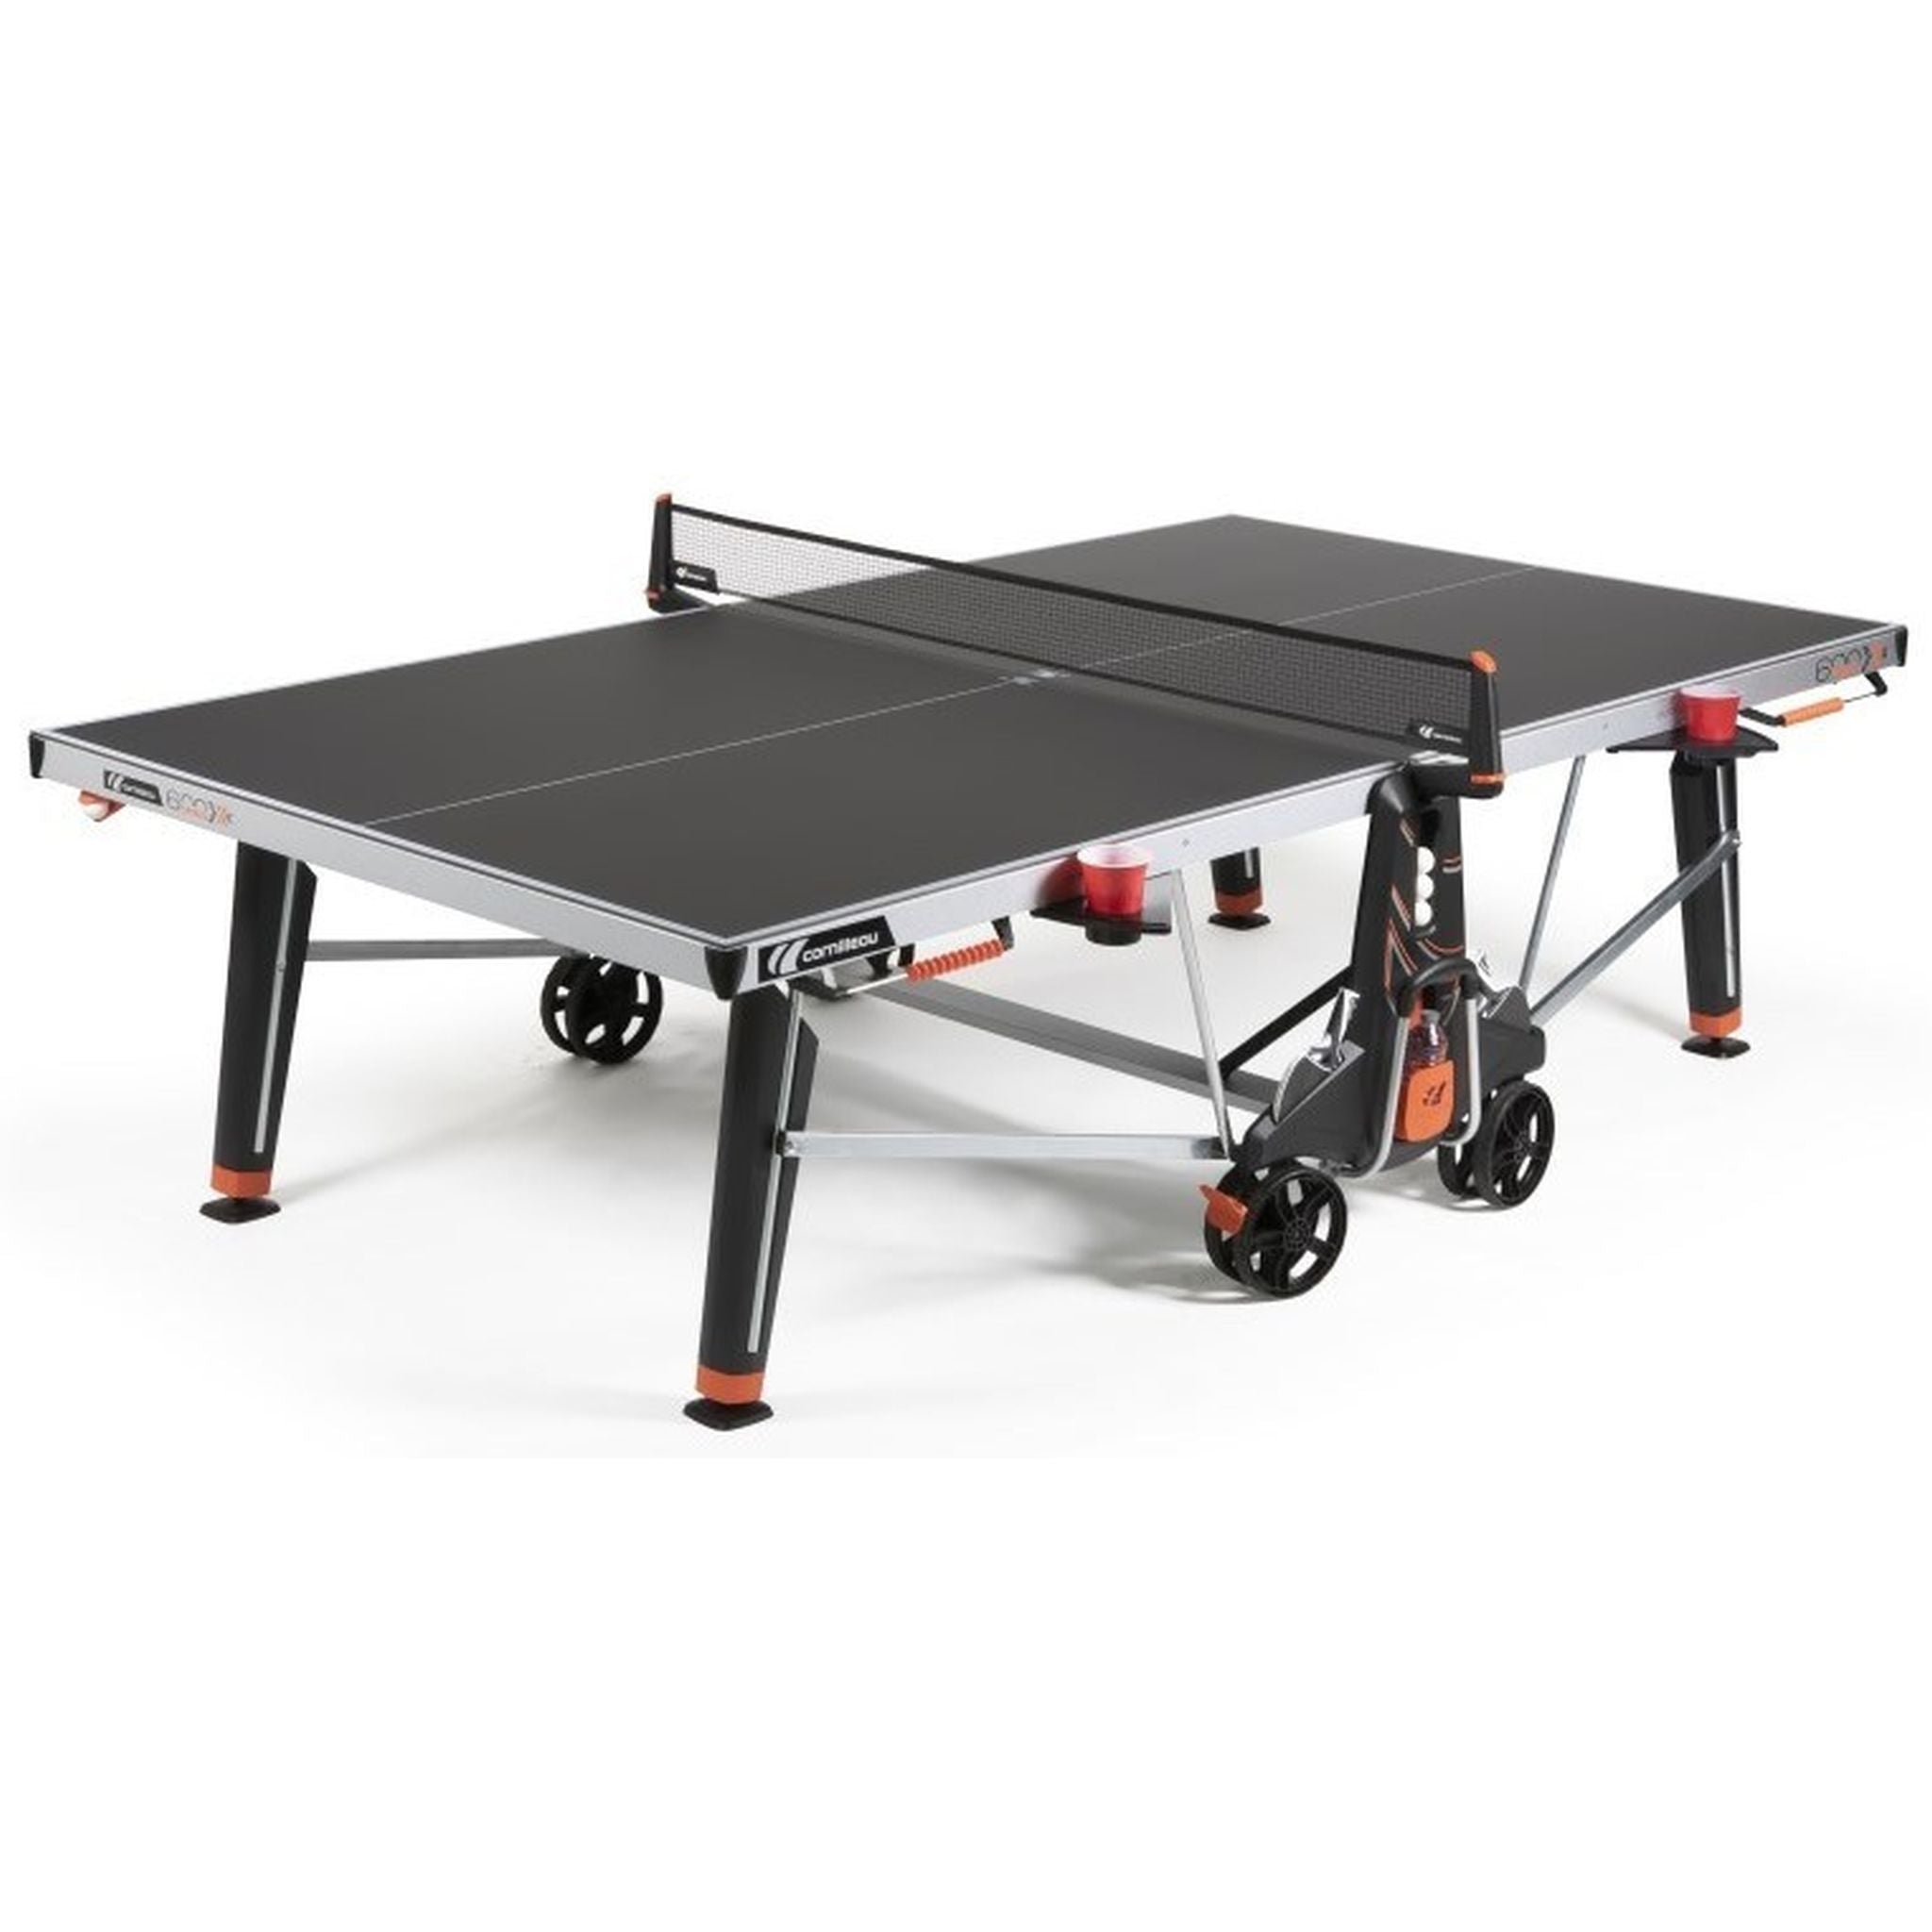 Cornilleau 600X Outdoor Table Tennis Table